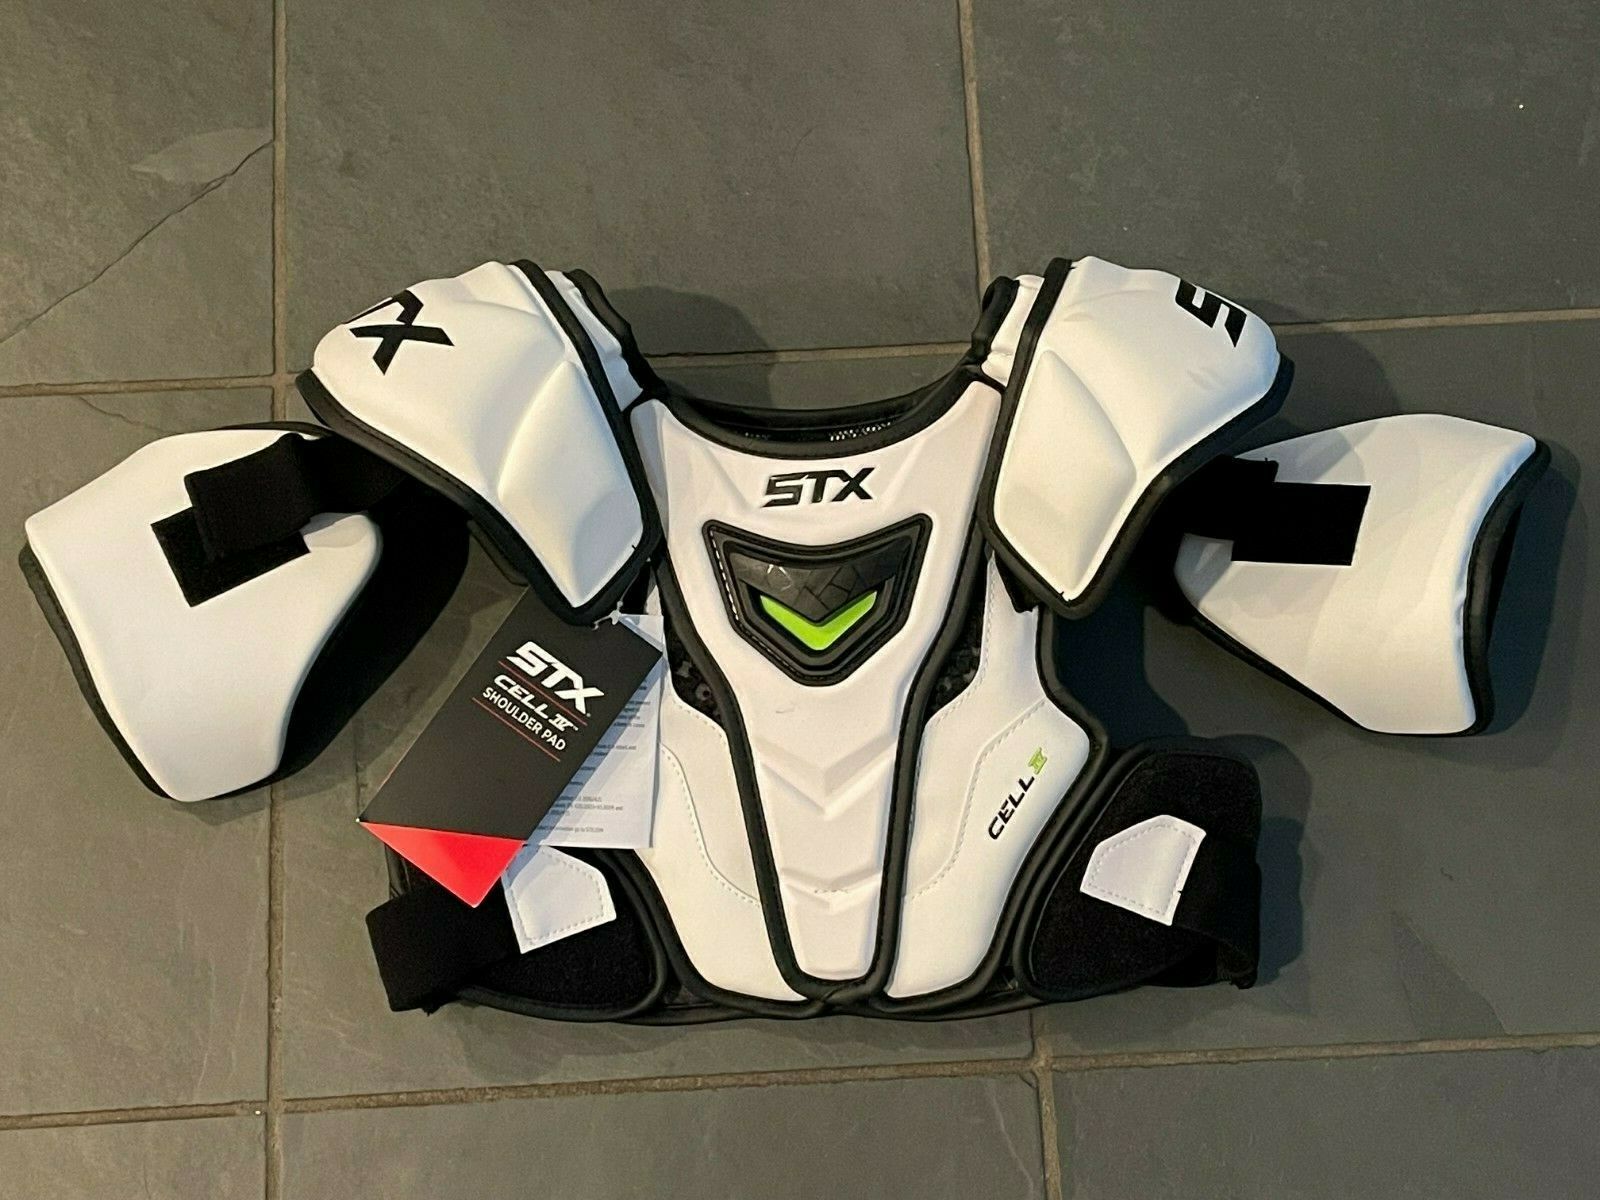 New W/ Tags Stx Cell Iv Lacrosse Shoulder Pads Large Retail $130